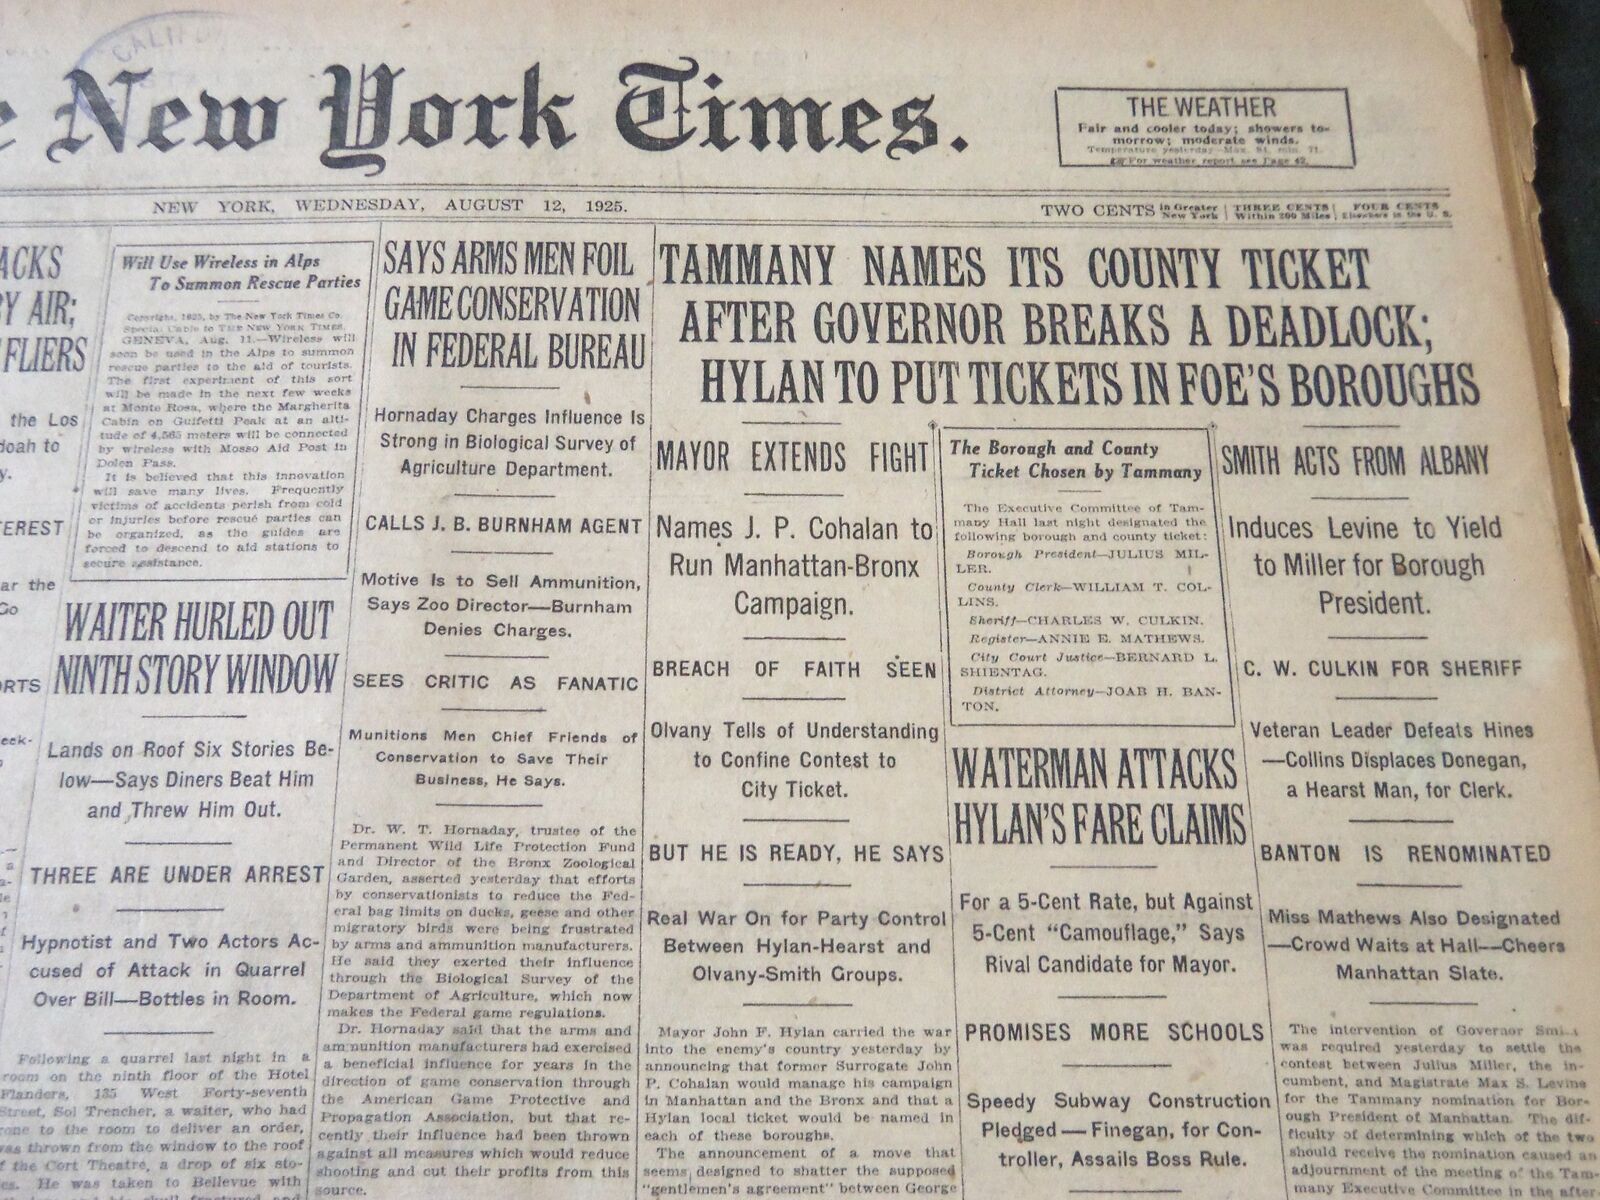 1925 AUGUST 12 NEW YORK TIMES - TAMMANY NAMES ITS COUNTY TICKET - NT 5430